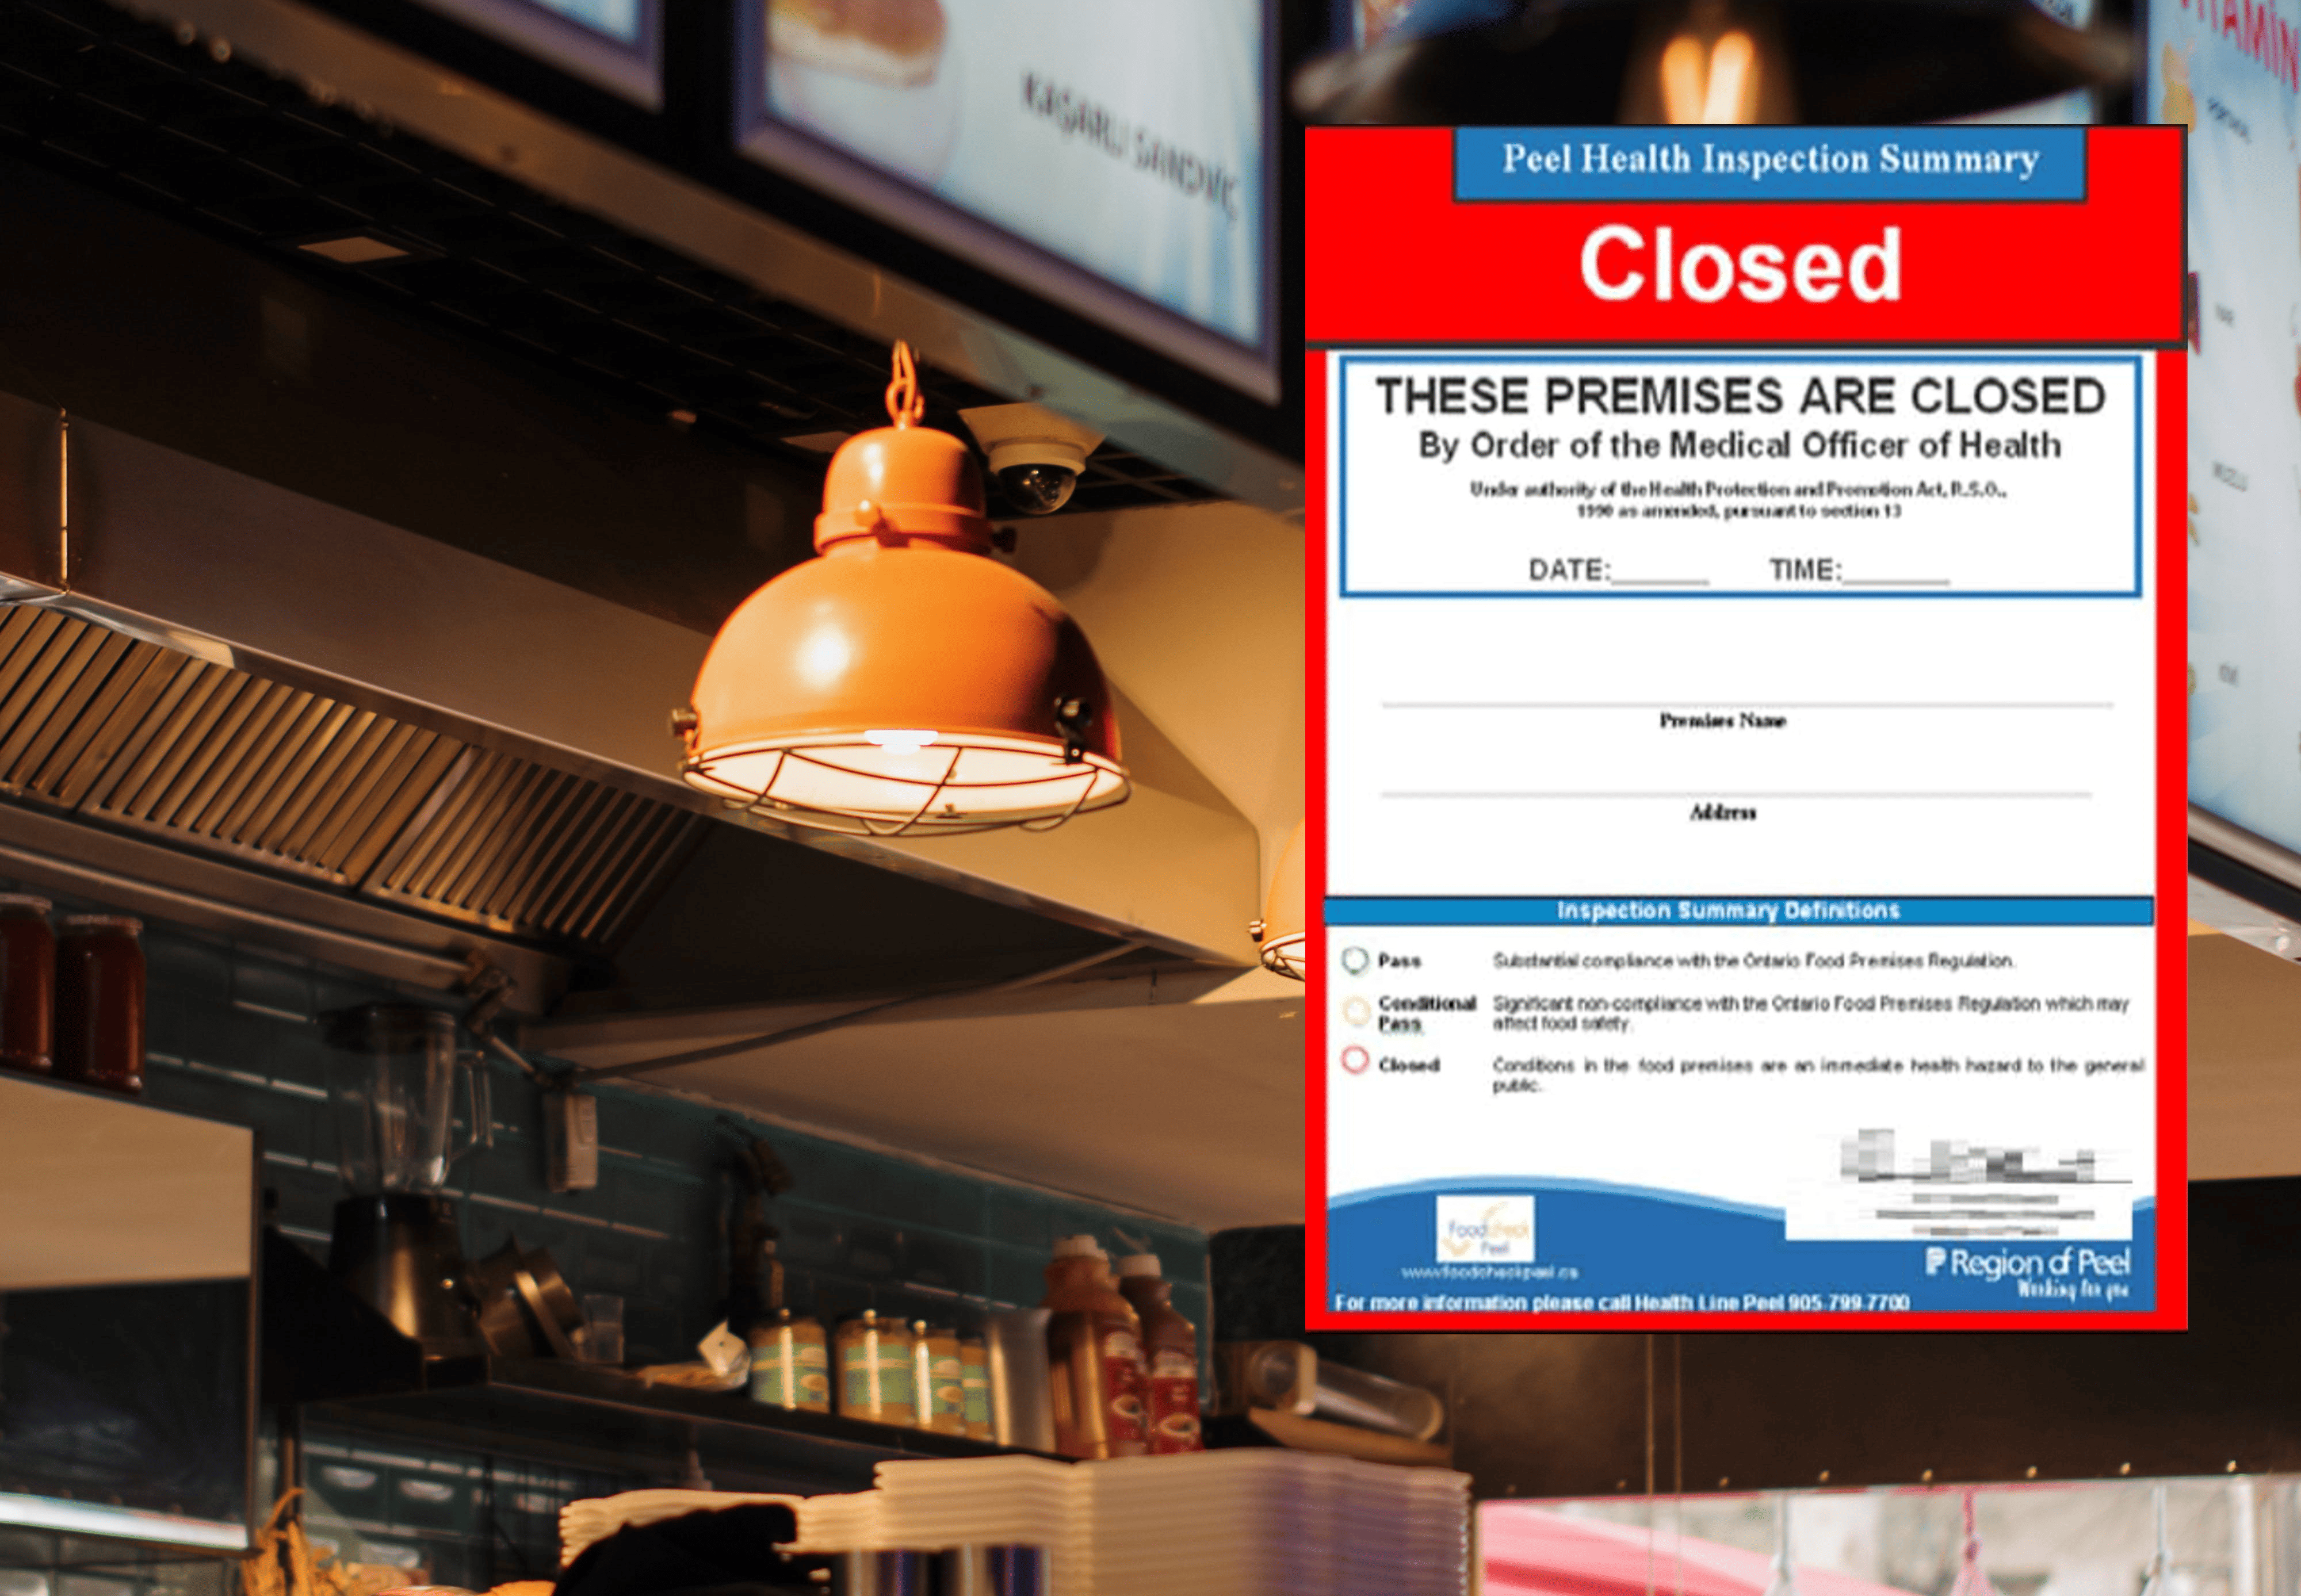 RED CARD CLOSURE: Popular all-day breakfast restaurant closed due to health risks in Brampton